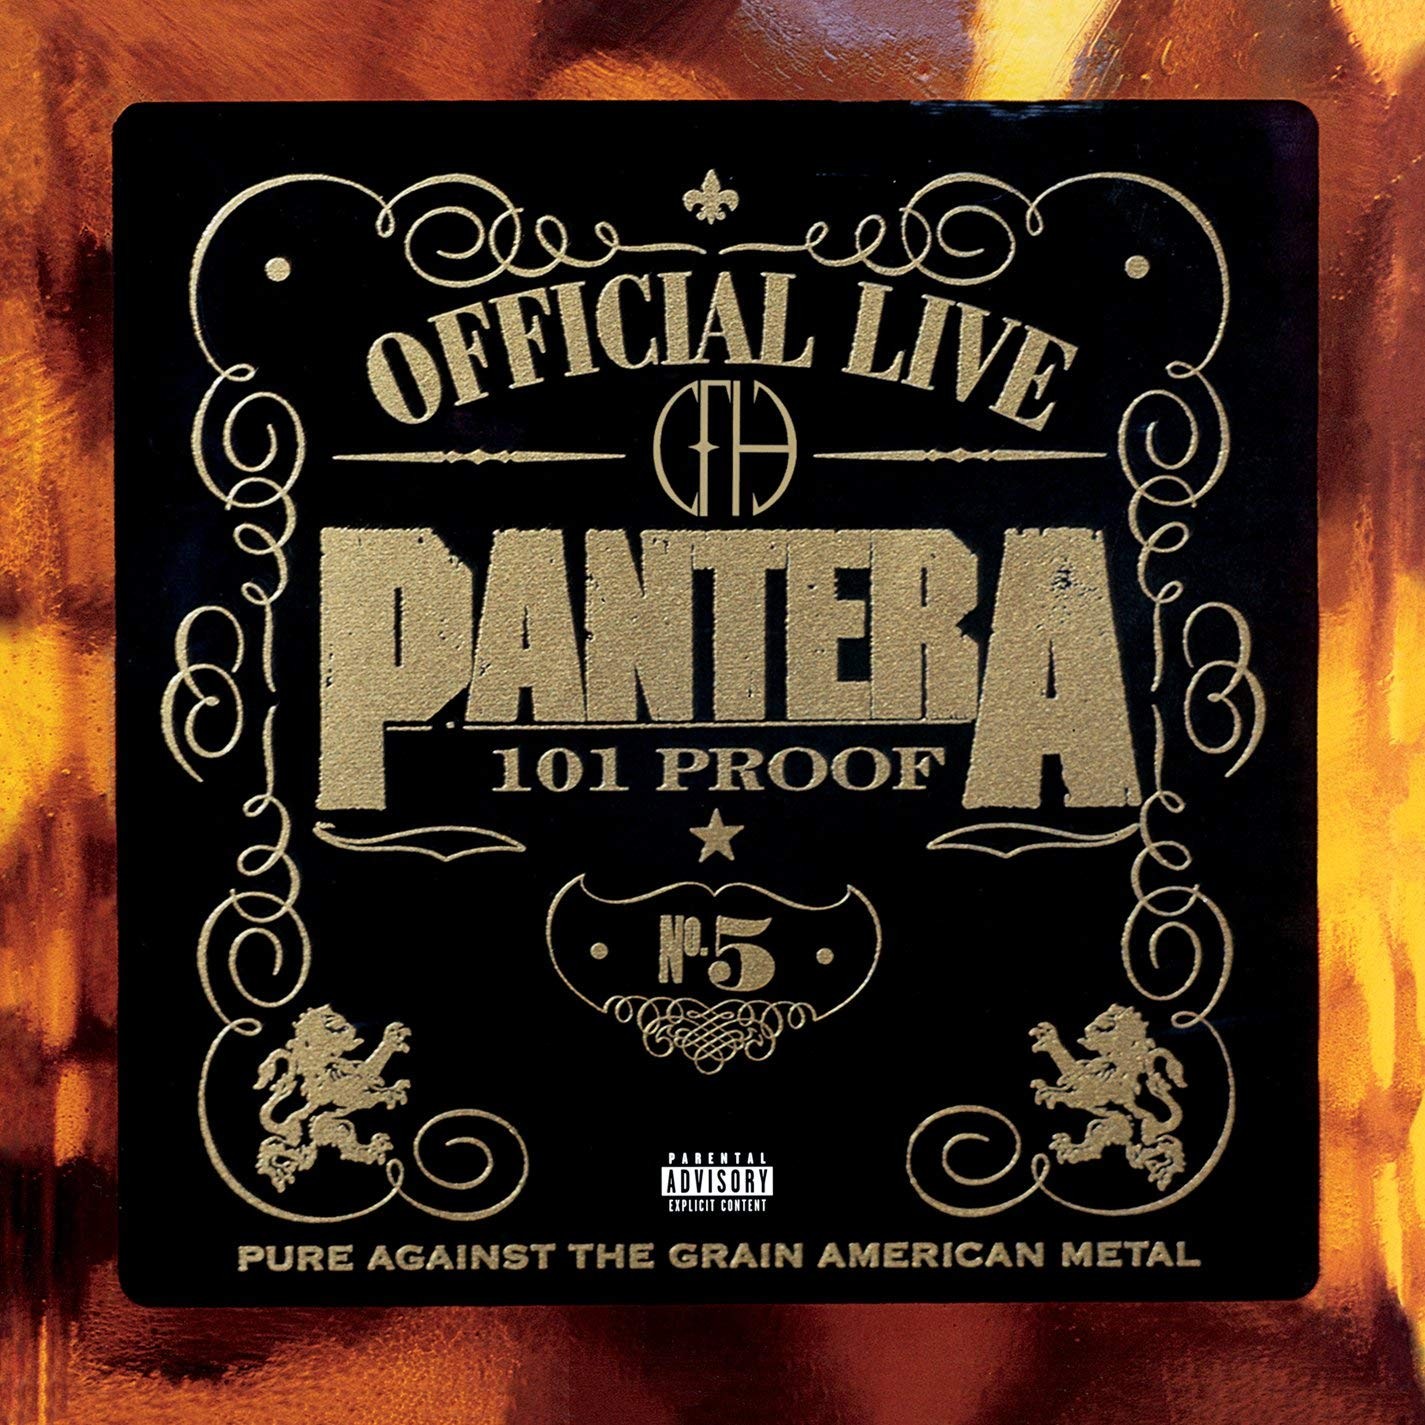 PANTERA – OFFICIAL LIVE – 101 PROOF – America Dvd